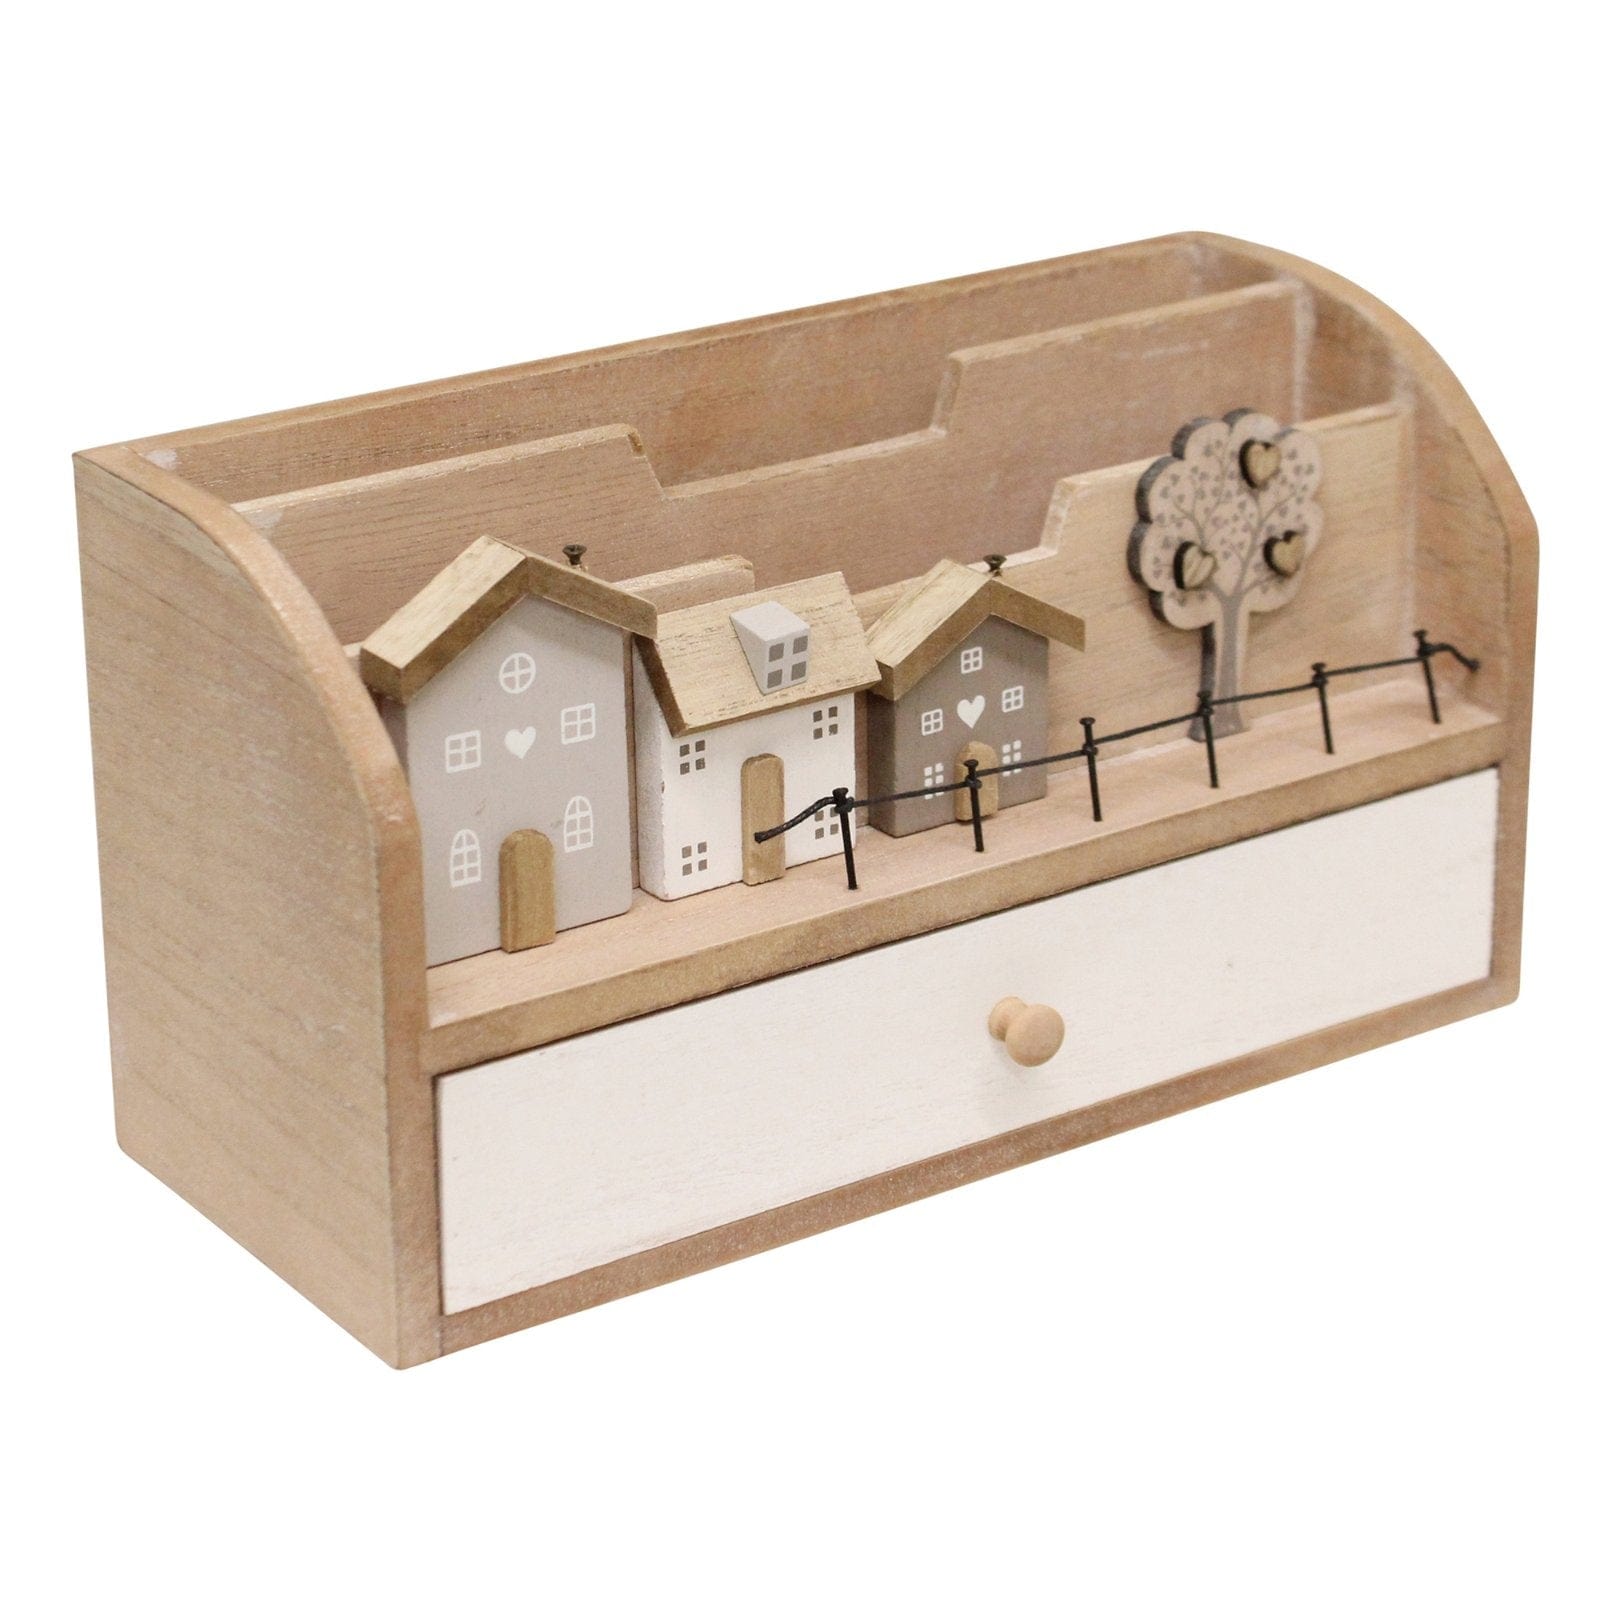 Letter Rack With Drawers, Wooden Houses Design - Kaftan direct